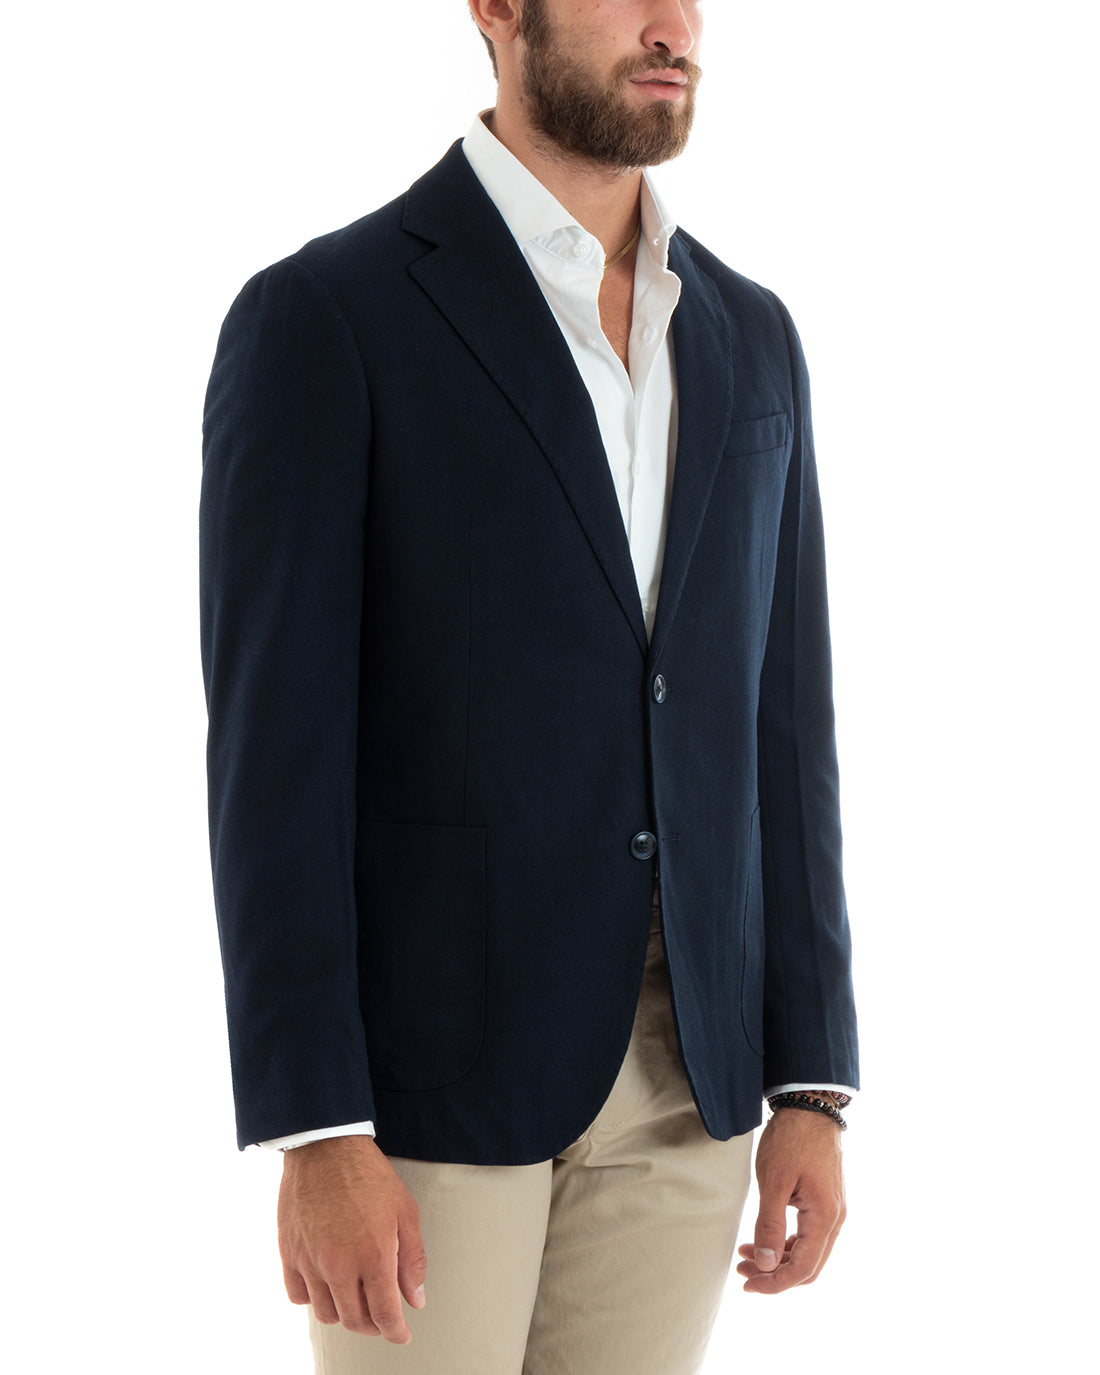 Men's Jacket Basic Blazer Single-breasted Classic Lapel Stitched Solid Color Casual Blue GIOSAL-G3085A